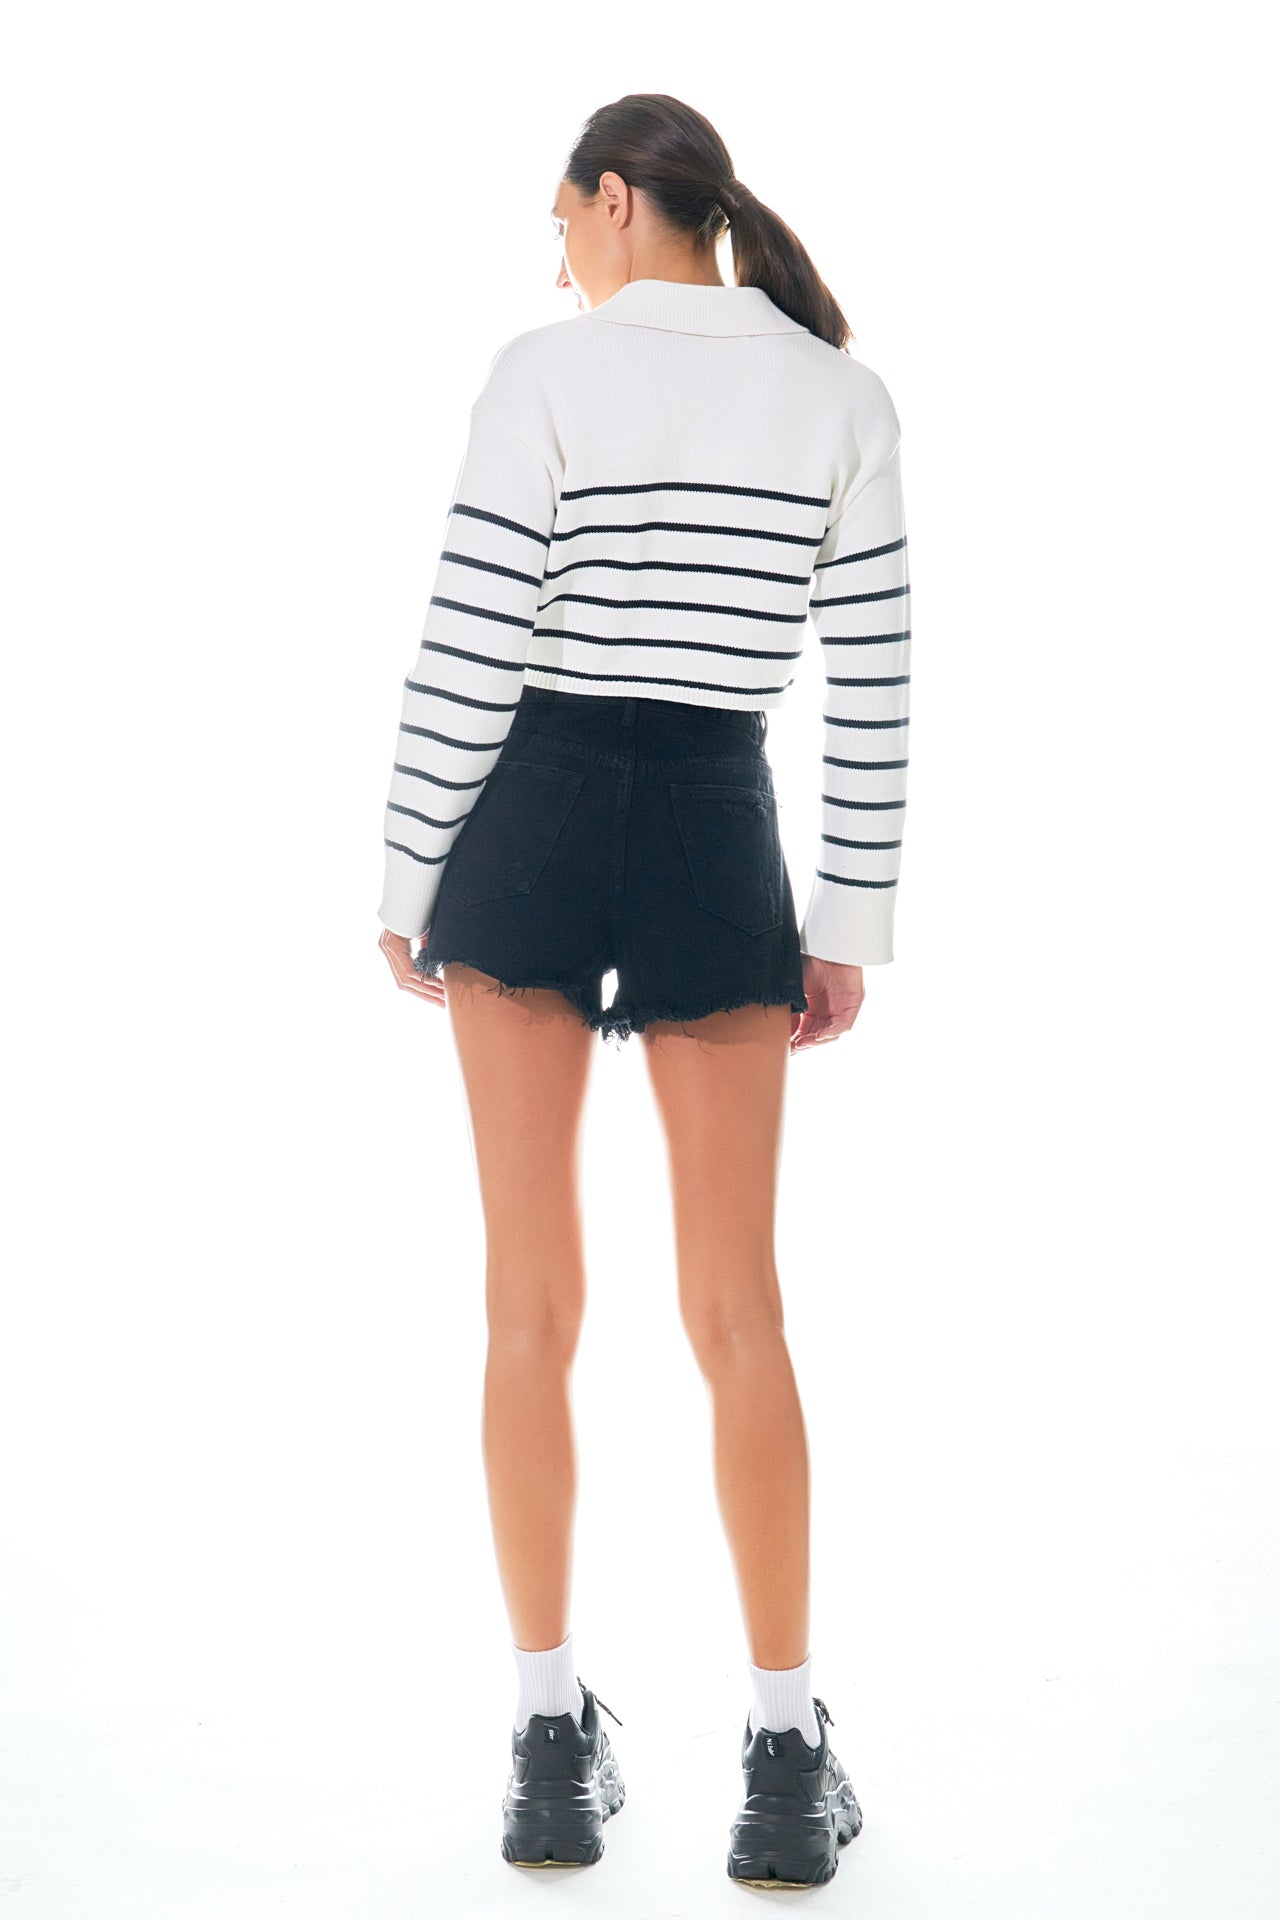 GREY LAB - Striped Crop Poly Sweater - SWEATERS & KNITS available at Objectrare